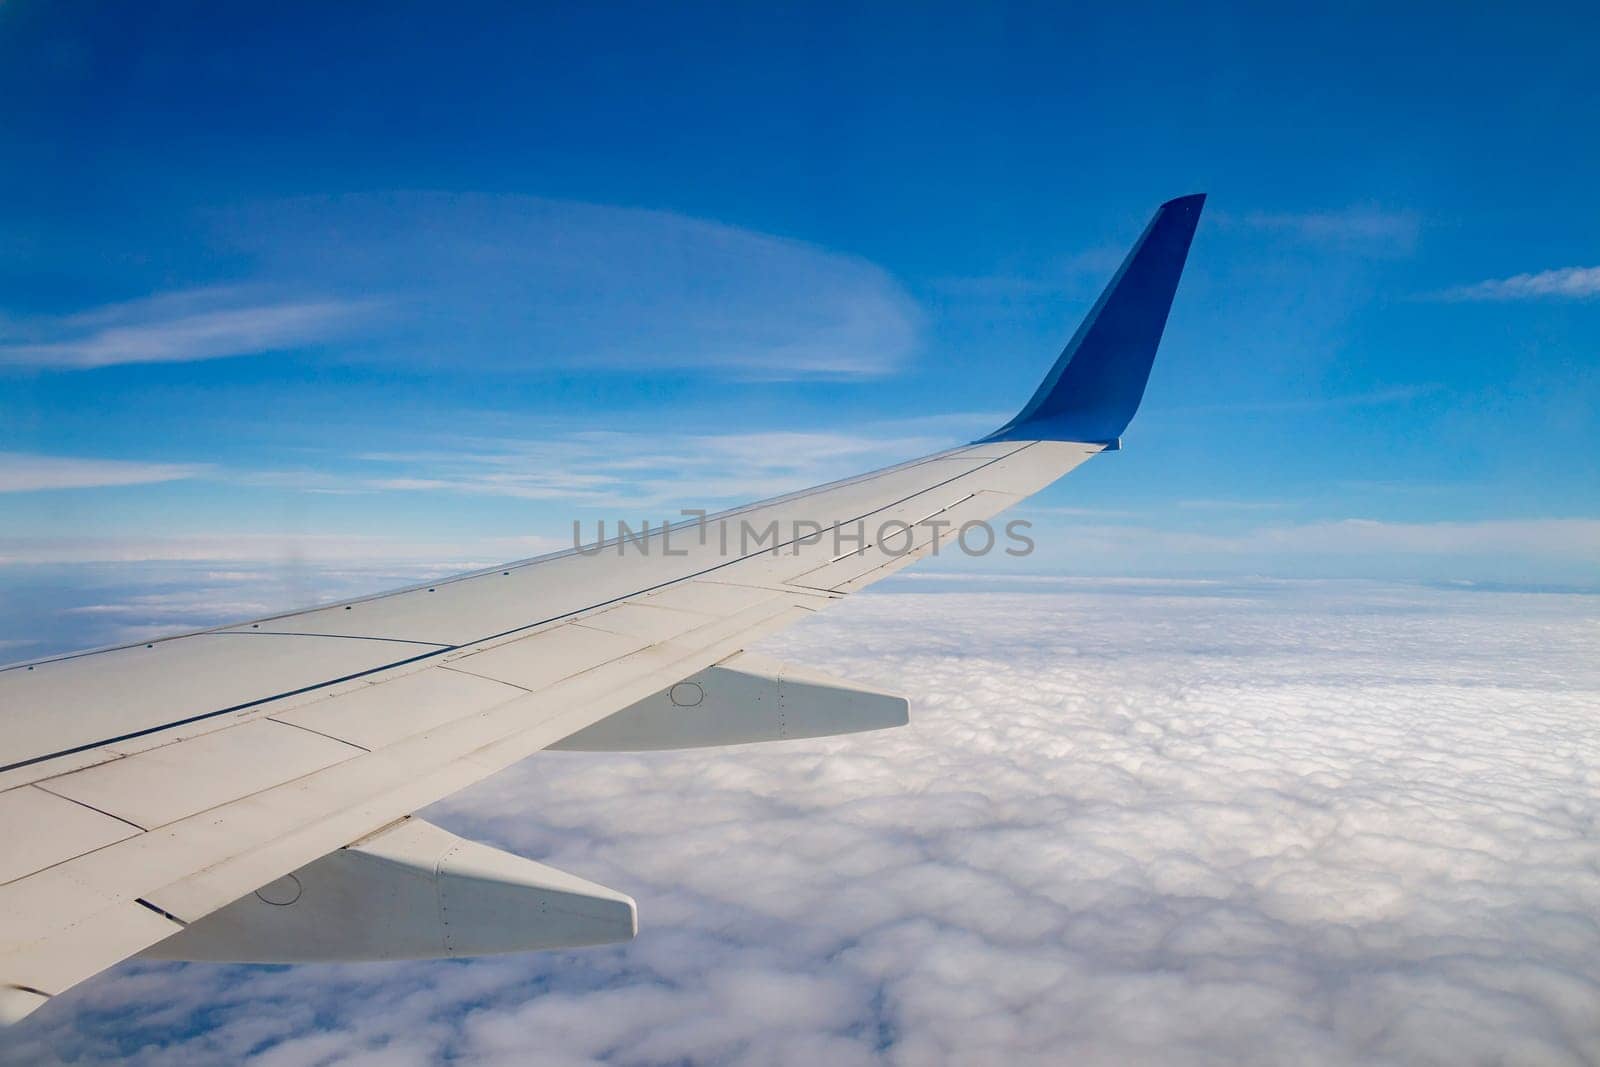 Airplane wing on the sky and over sea with clouds.